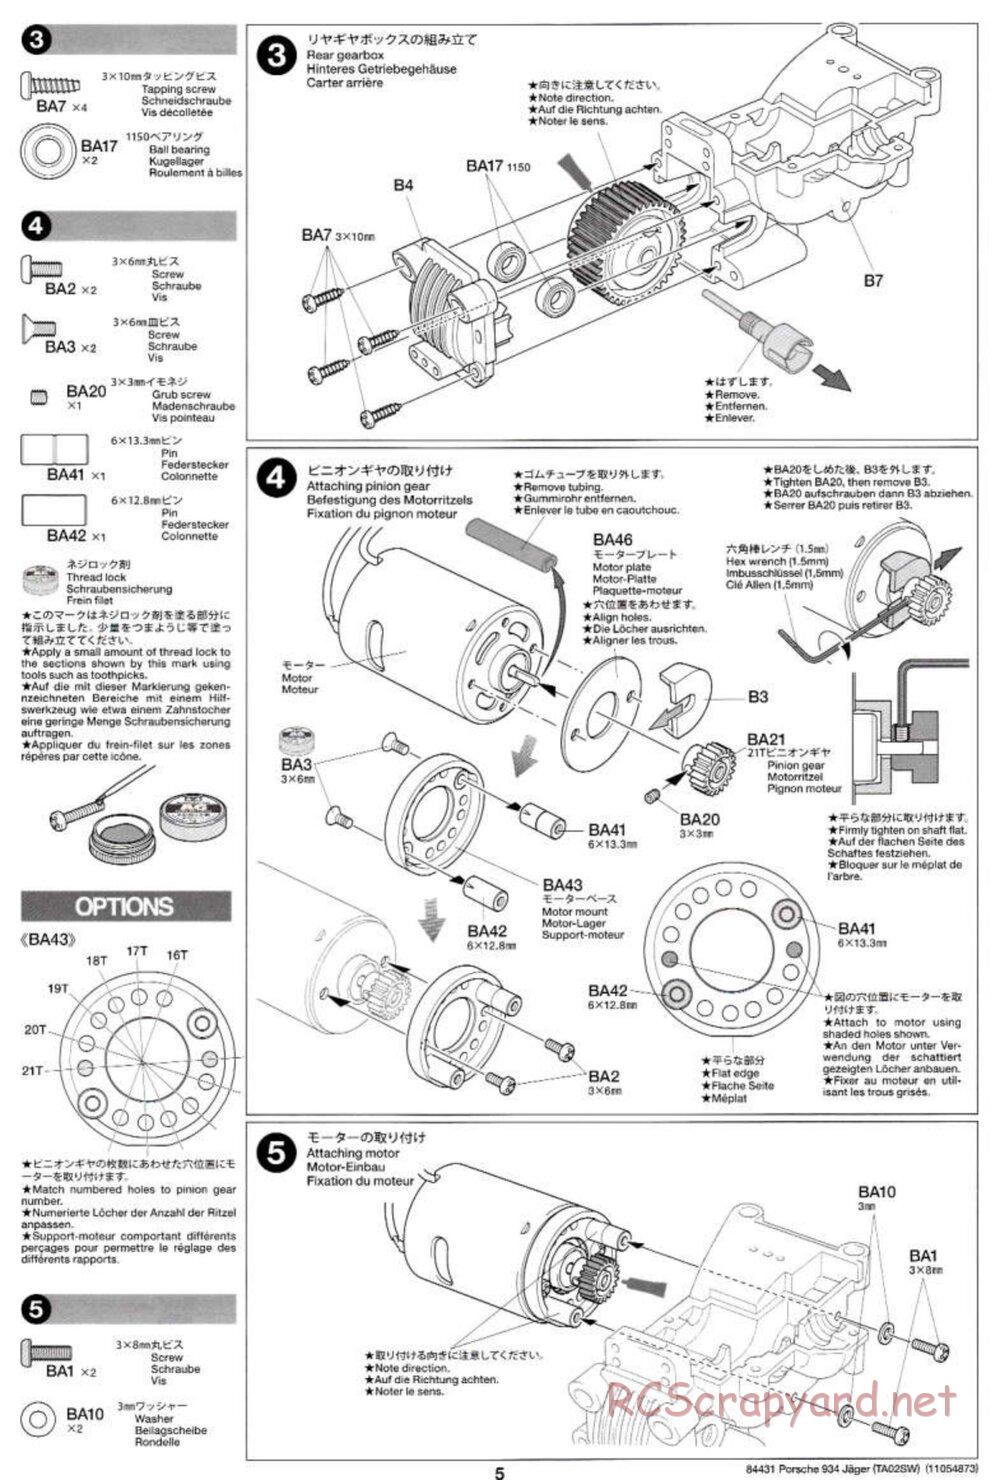 Tamiya - Porsche Turbo RSR Type 934 Jagermeister - TA-02SW Chassis - Manual - Page 5